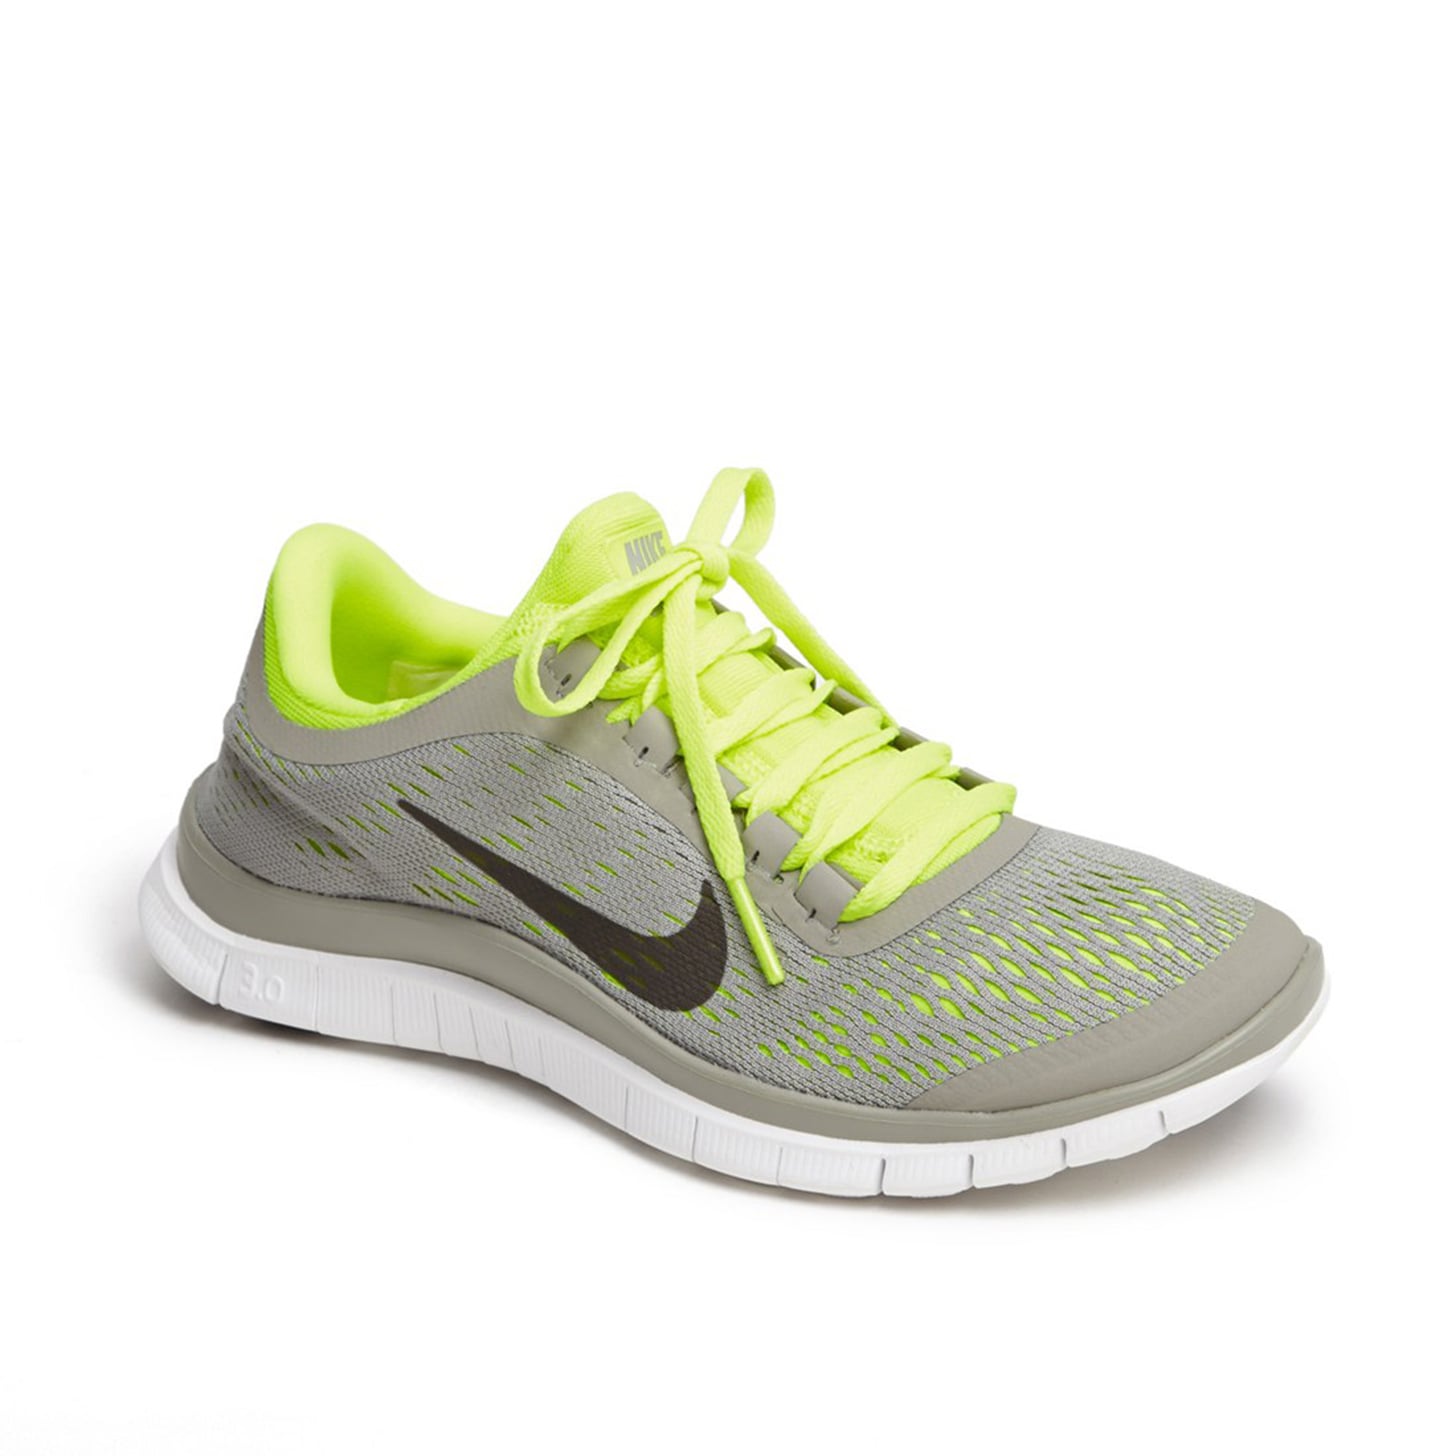 Nike Free 3.0 v5 Running Shoe | What We'd Positively Love to Buy Month | POPSUGAR Fashion Photo 26